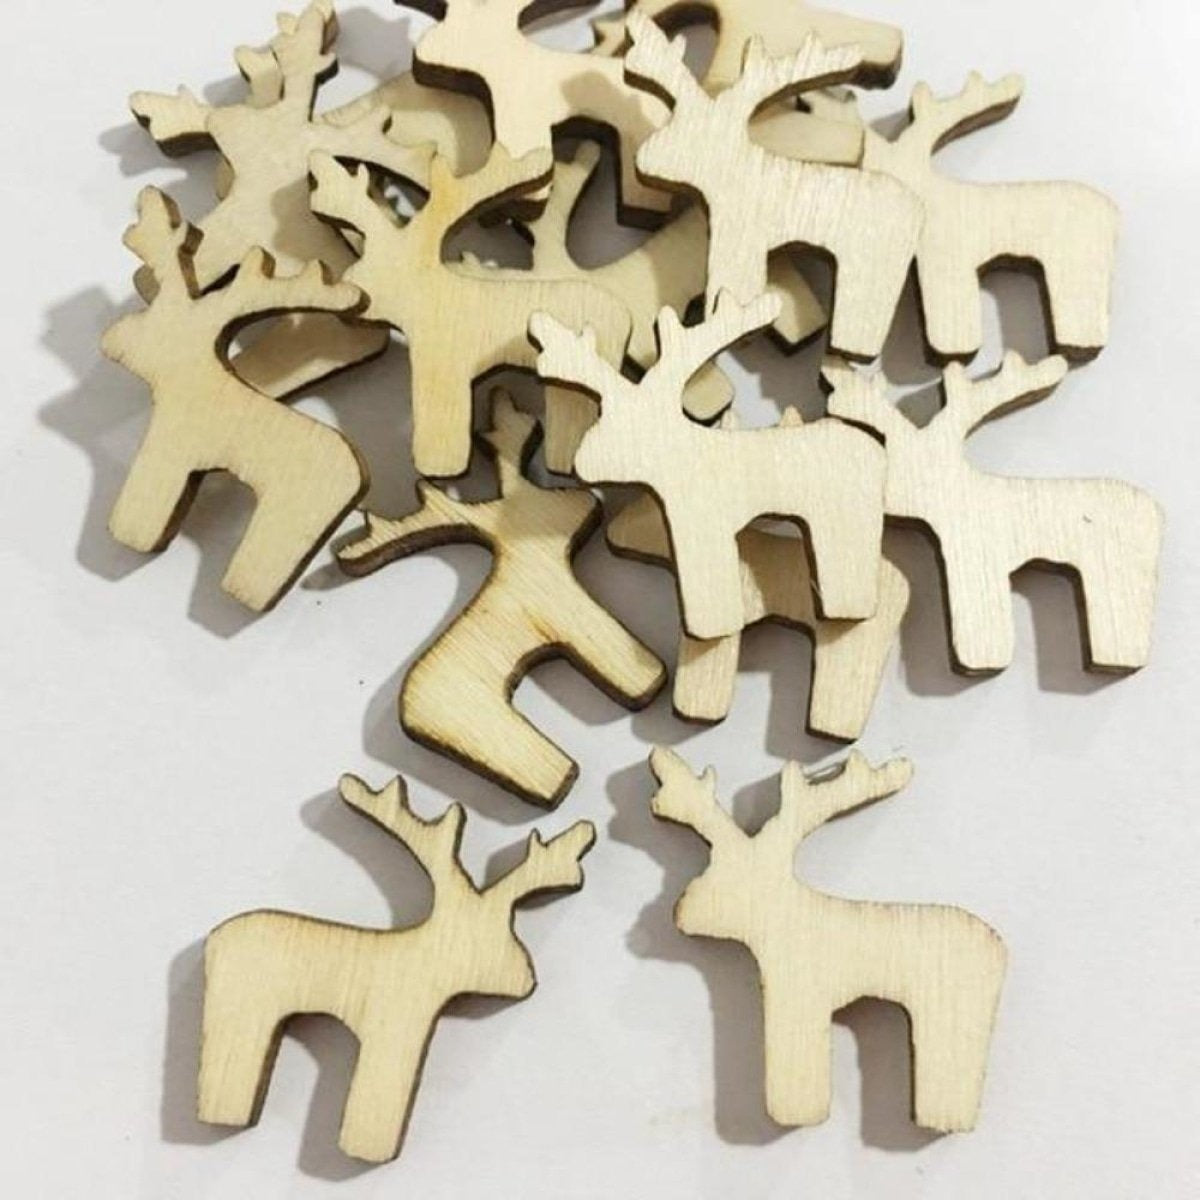 50Pcs Reindeer 21Mm Natural Wood Craft Christmas Pendant Hanging Ornament New Year Decor Home